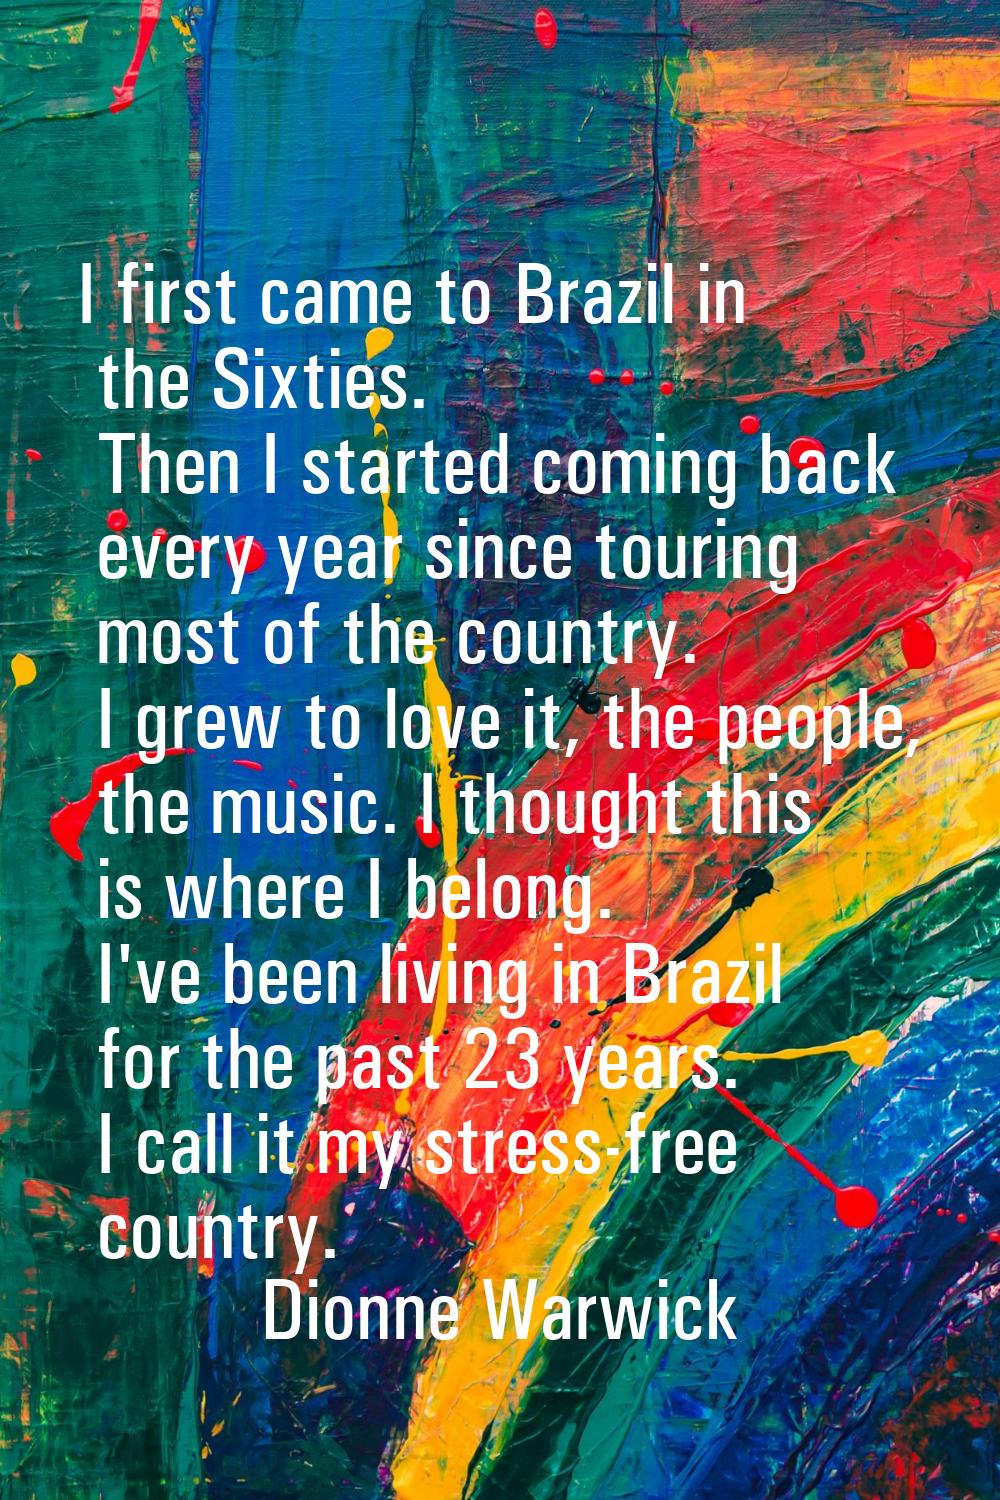 I first came to Brazil in the Sixties. Then I started coming back every year since touring most of 